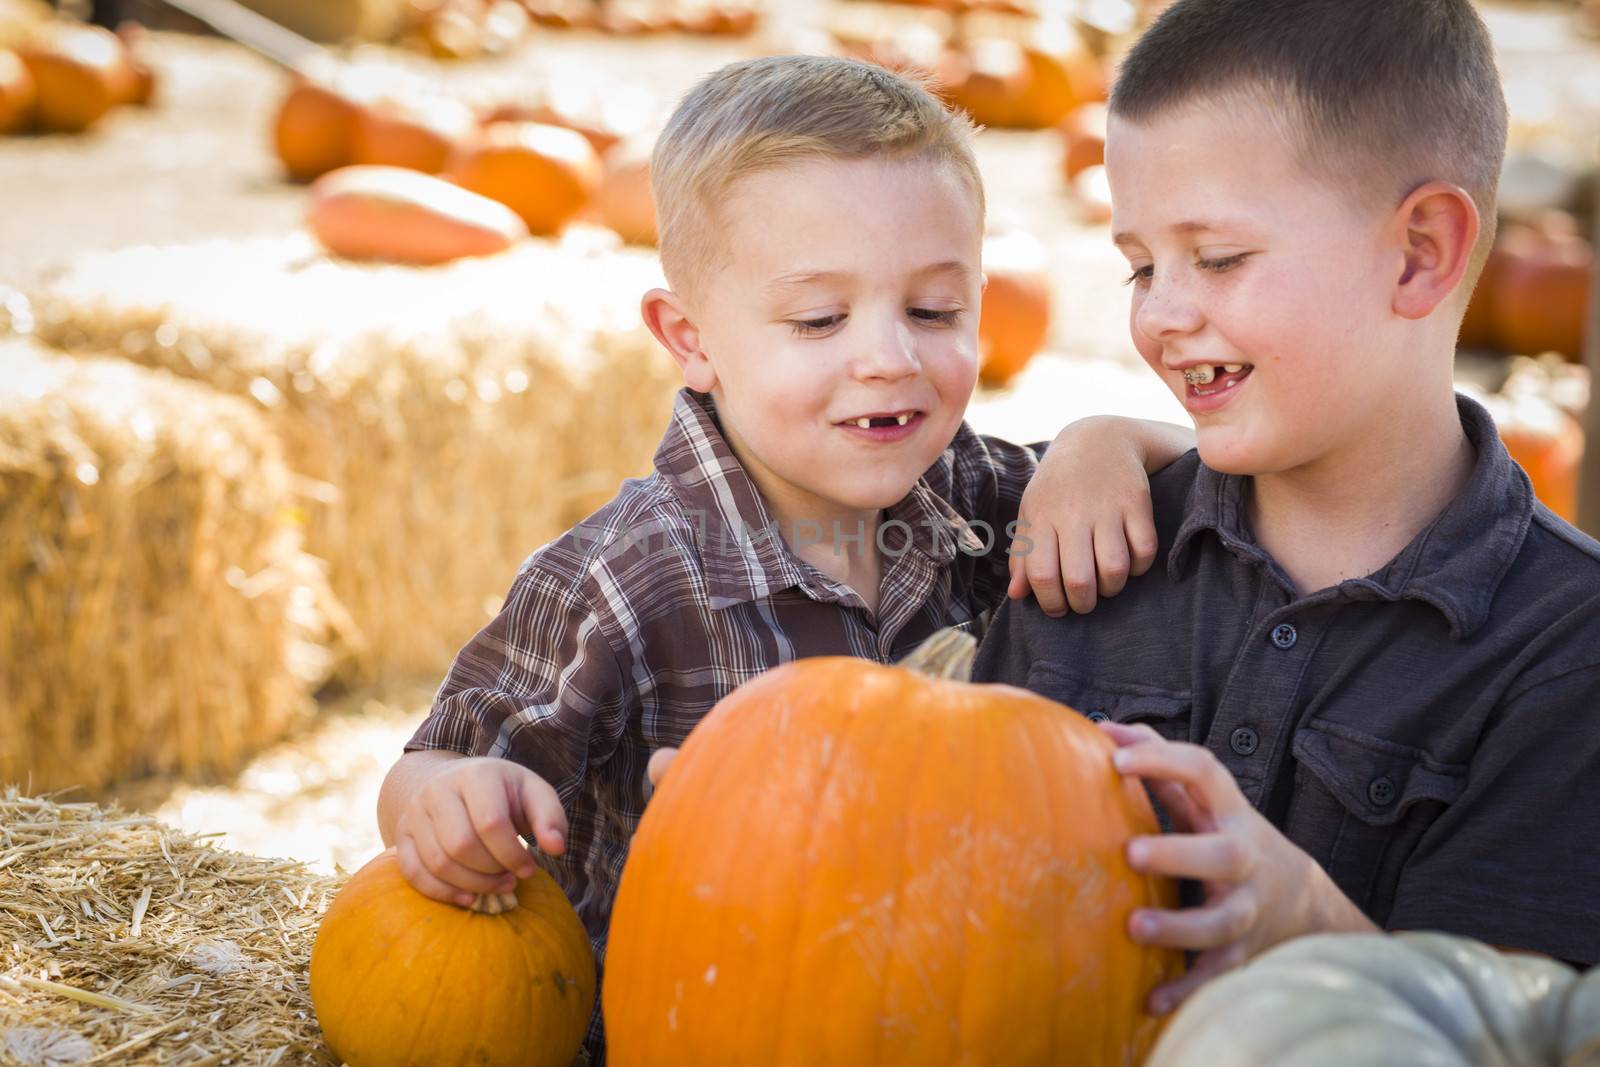 Two Boys at the Pumpkin Patch Talking and Having Fun
 by Feverpitched